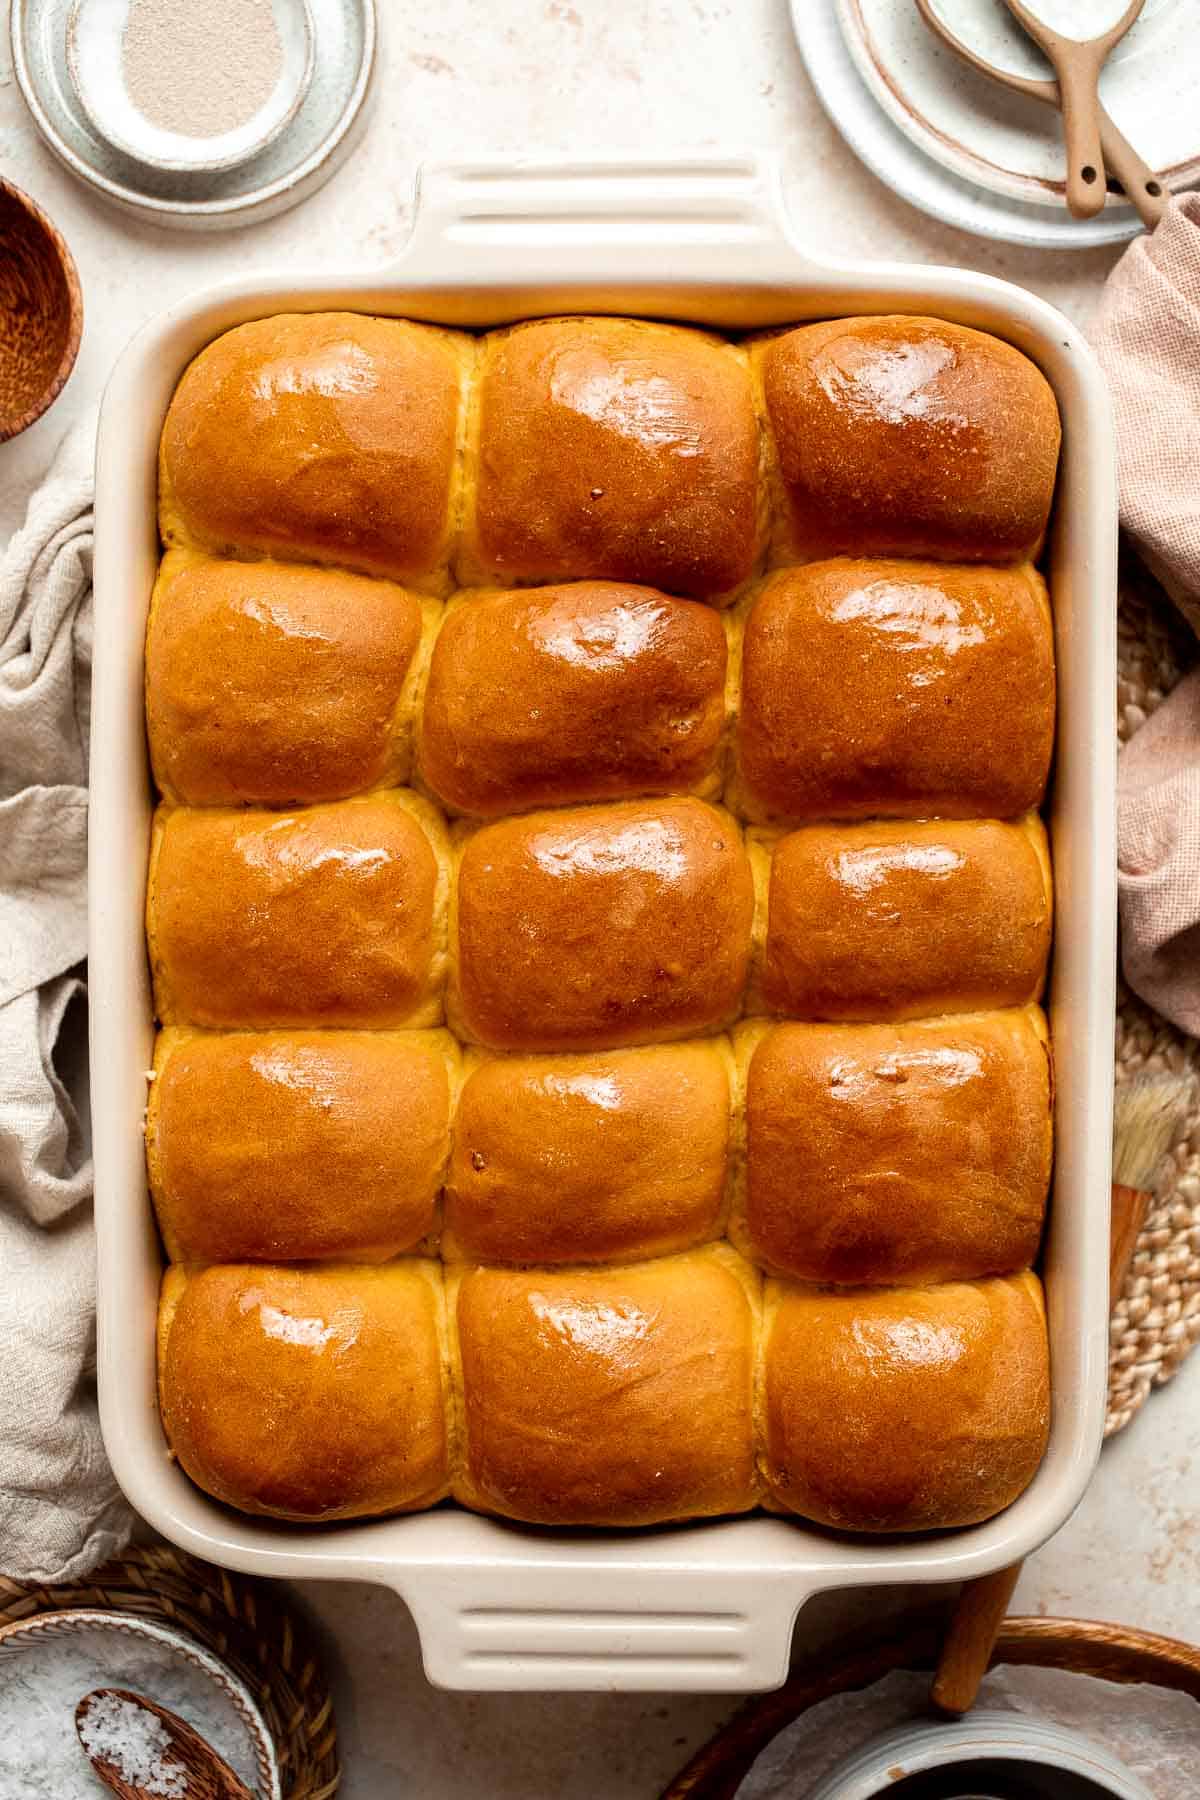 Fluffy Sweet Potato Rolls are made with perfectly cooked sweet potato, which adds a tenderness and sweet flavor that takes them over the top! | aheadofthyme.com